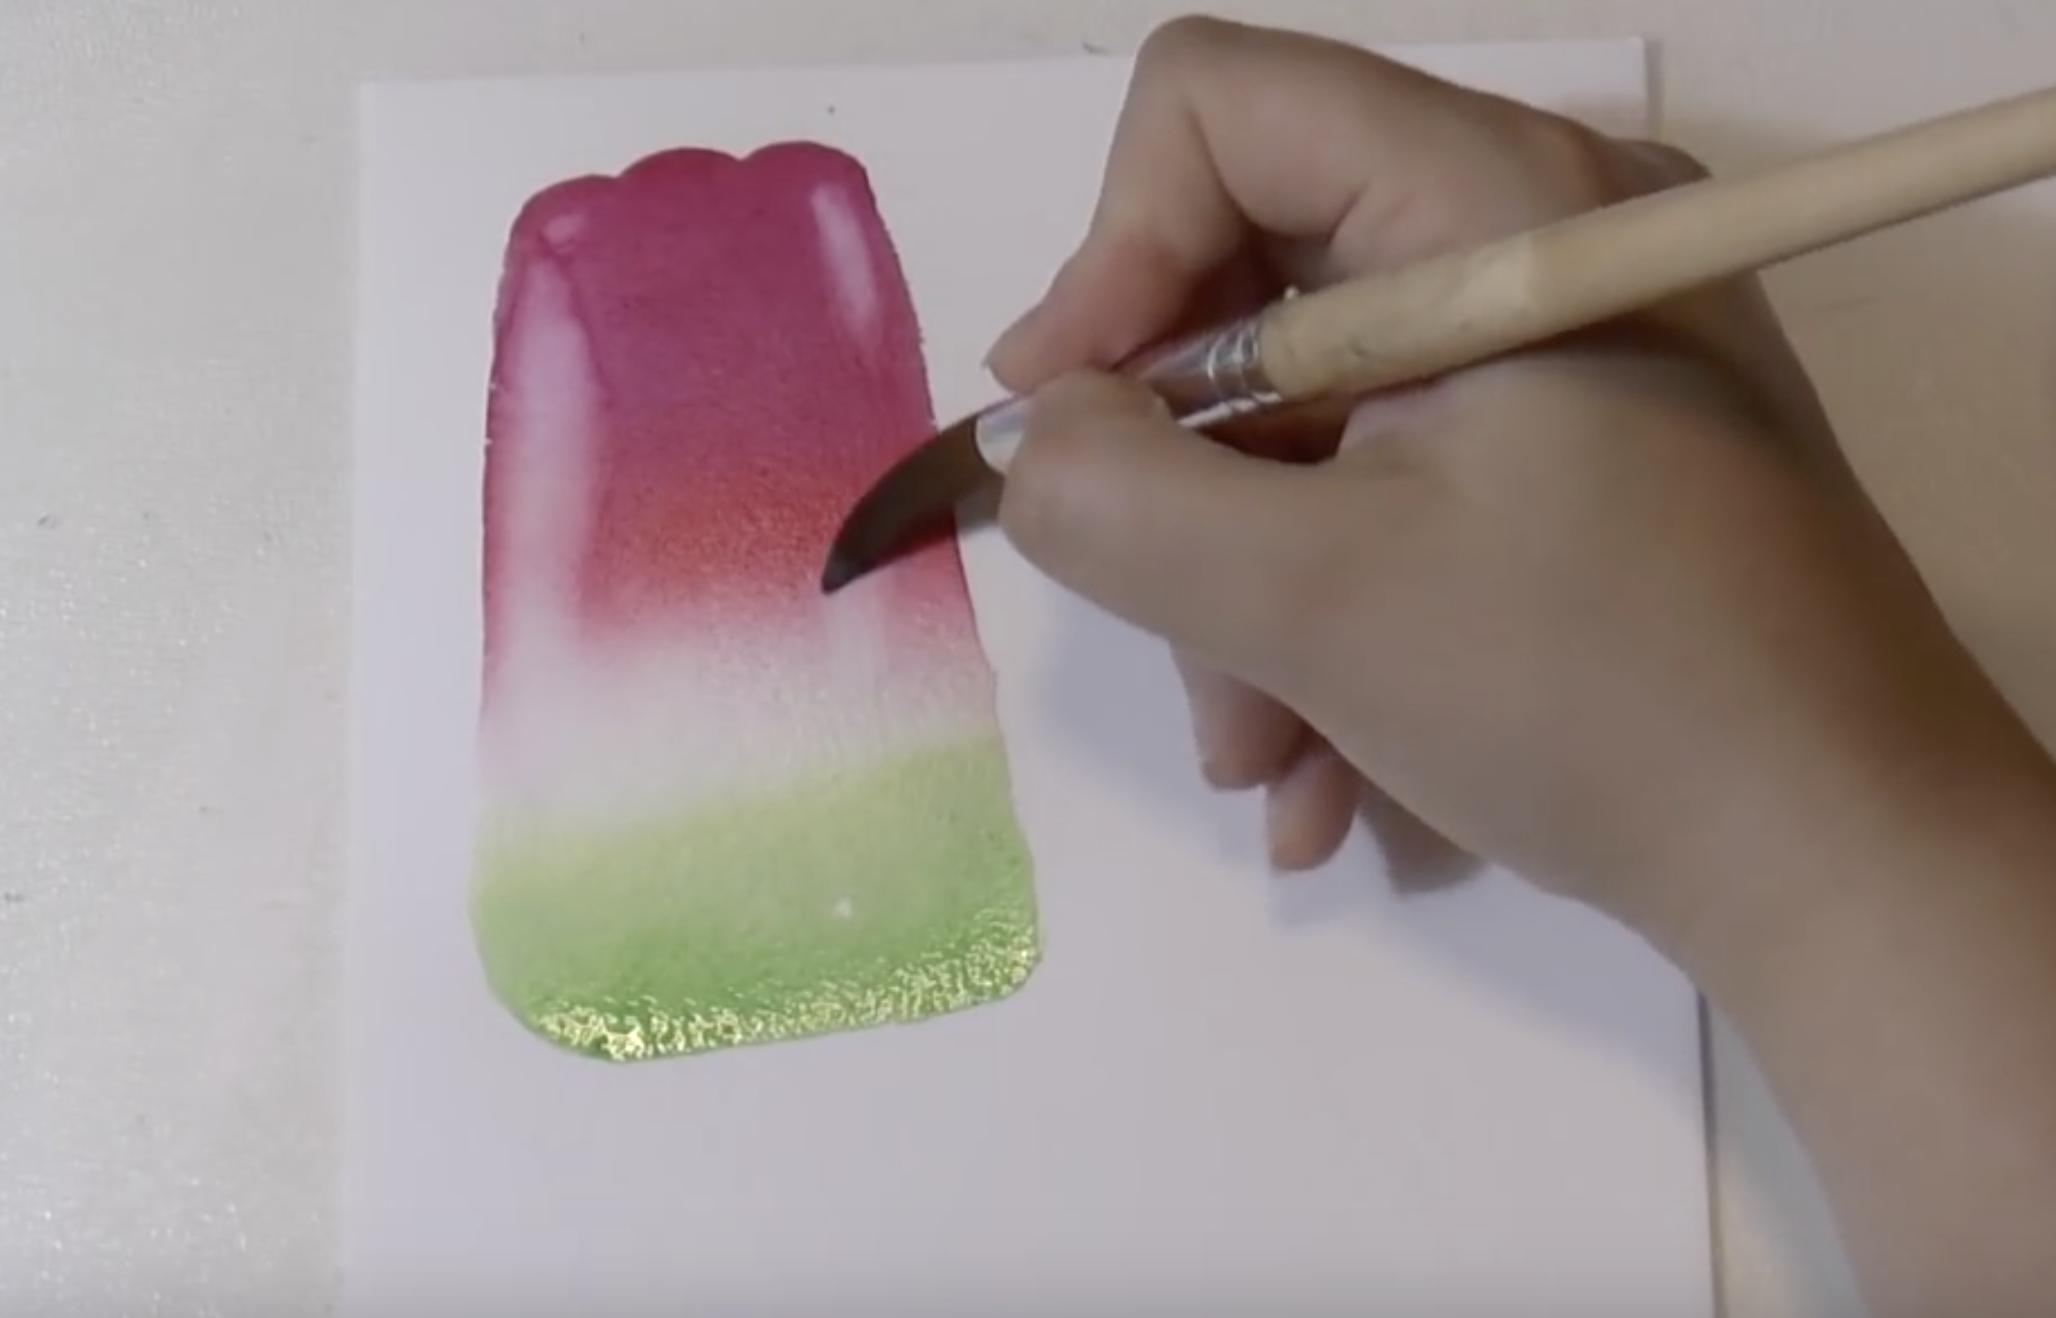 easy-watercolor-ideas-techniques-how-to-paint-a-watercolor-popsicle - Step 4